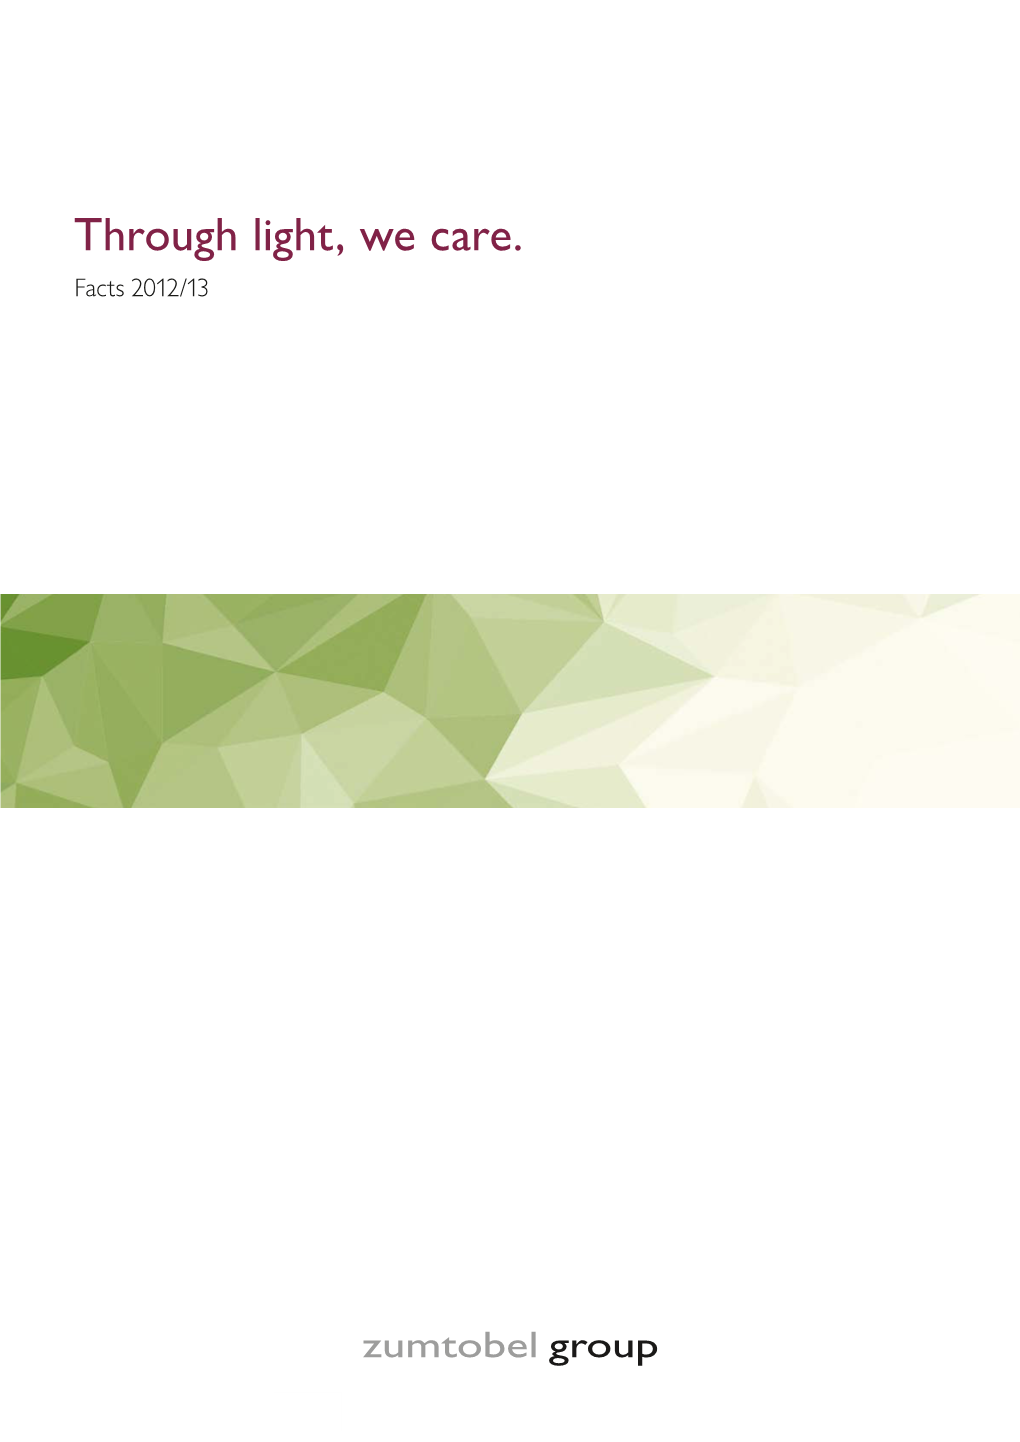 Through Light, We Care. Facts 2012/13 Report Profile the Zumtobel Group in Brief